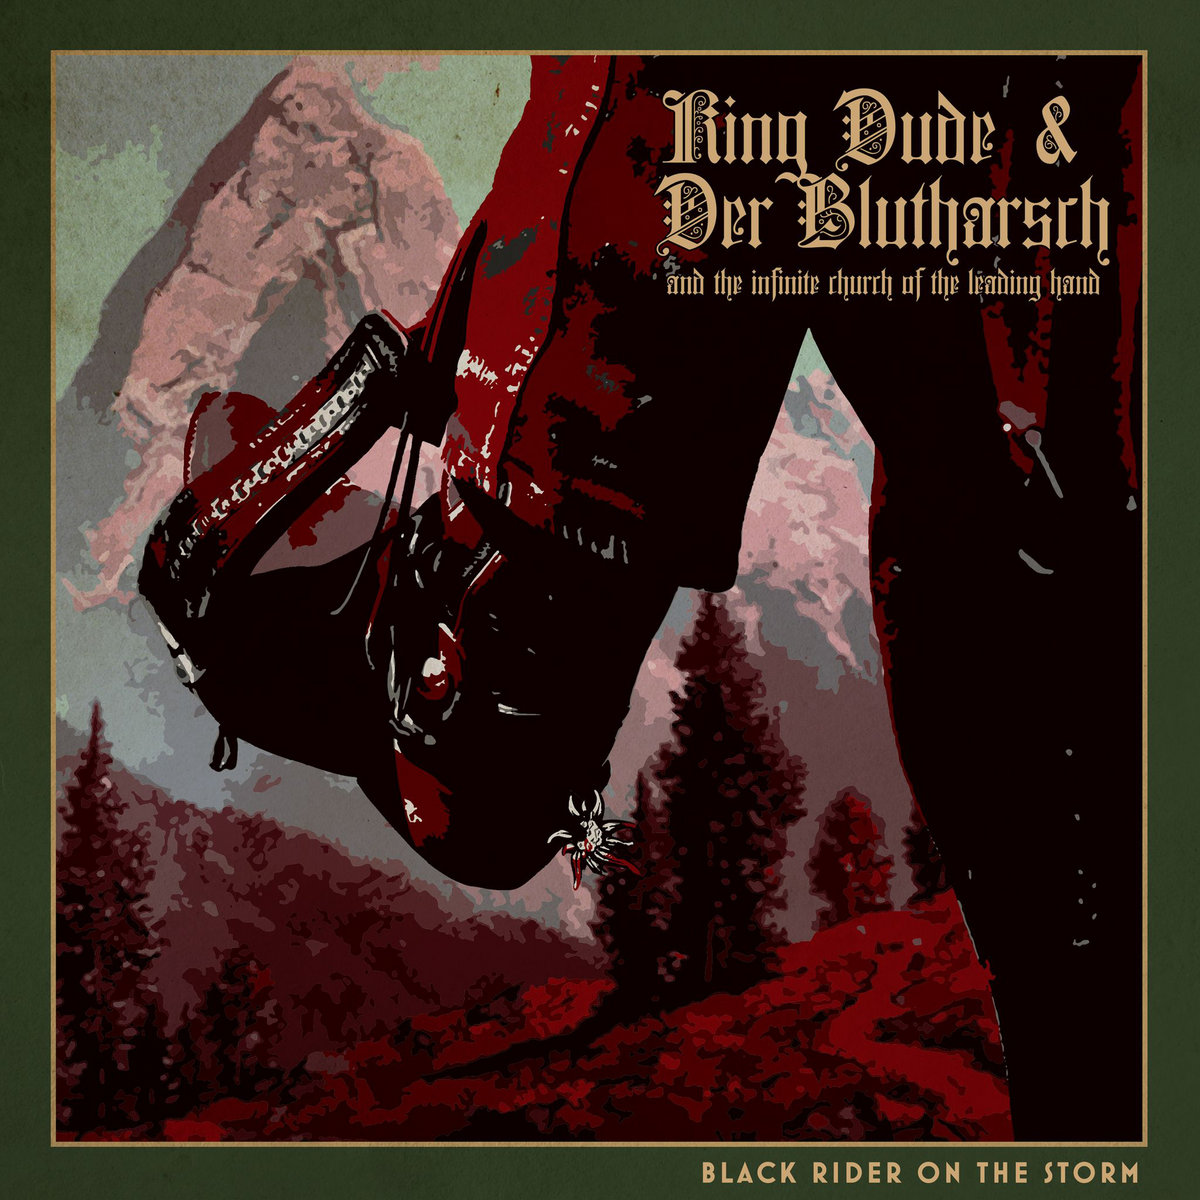 King Dude & Der Blutharsch & The Infinite church of the leading Hand cover